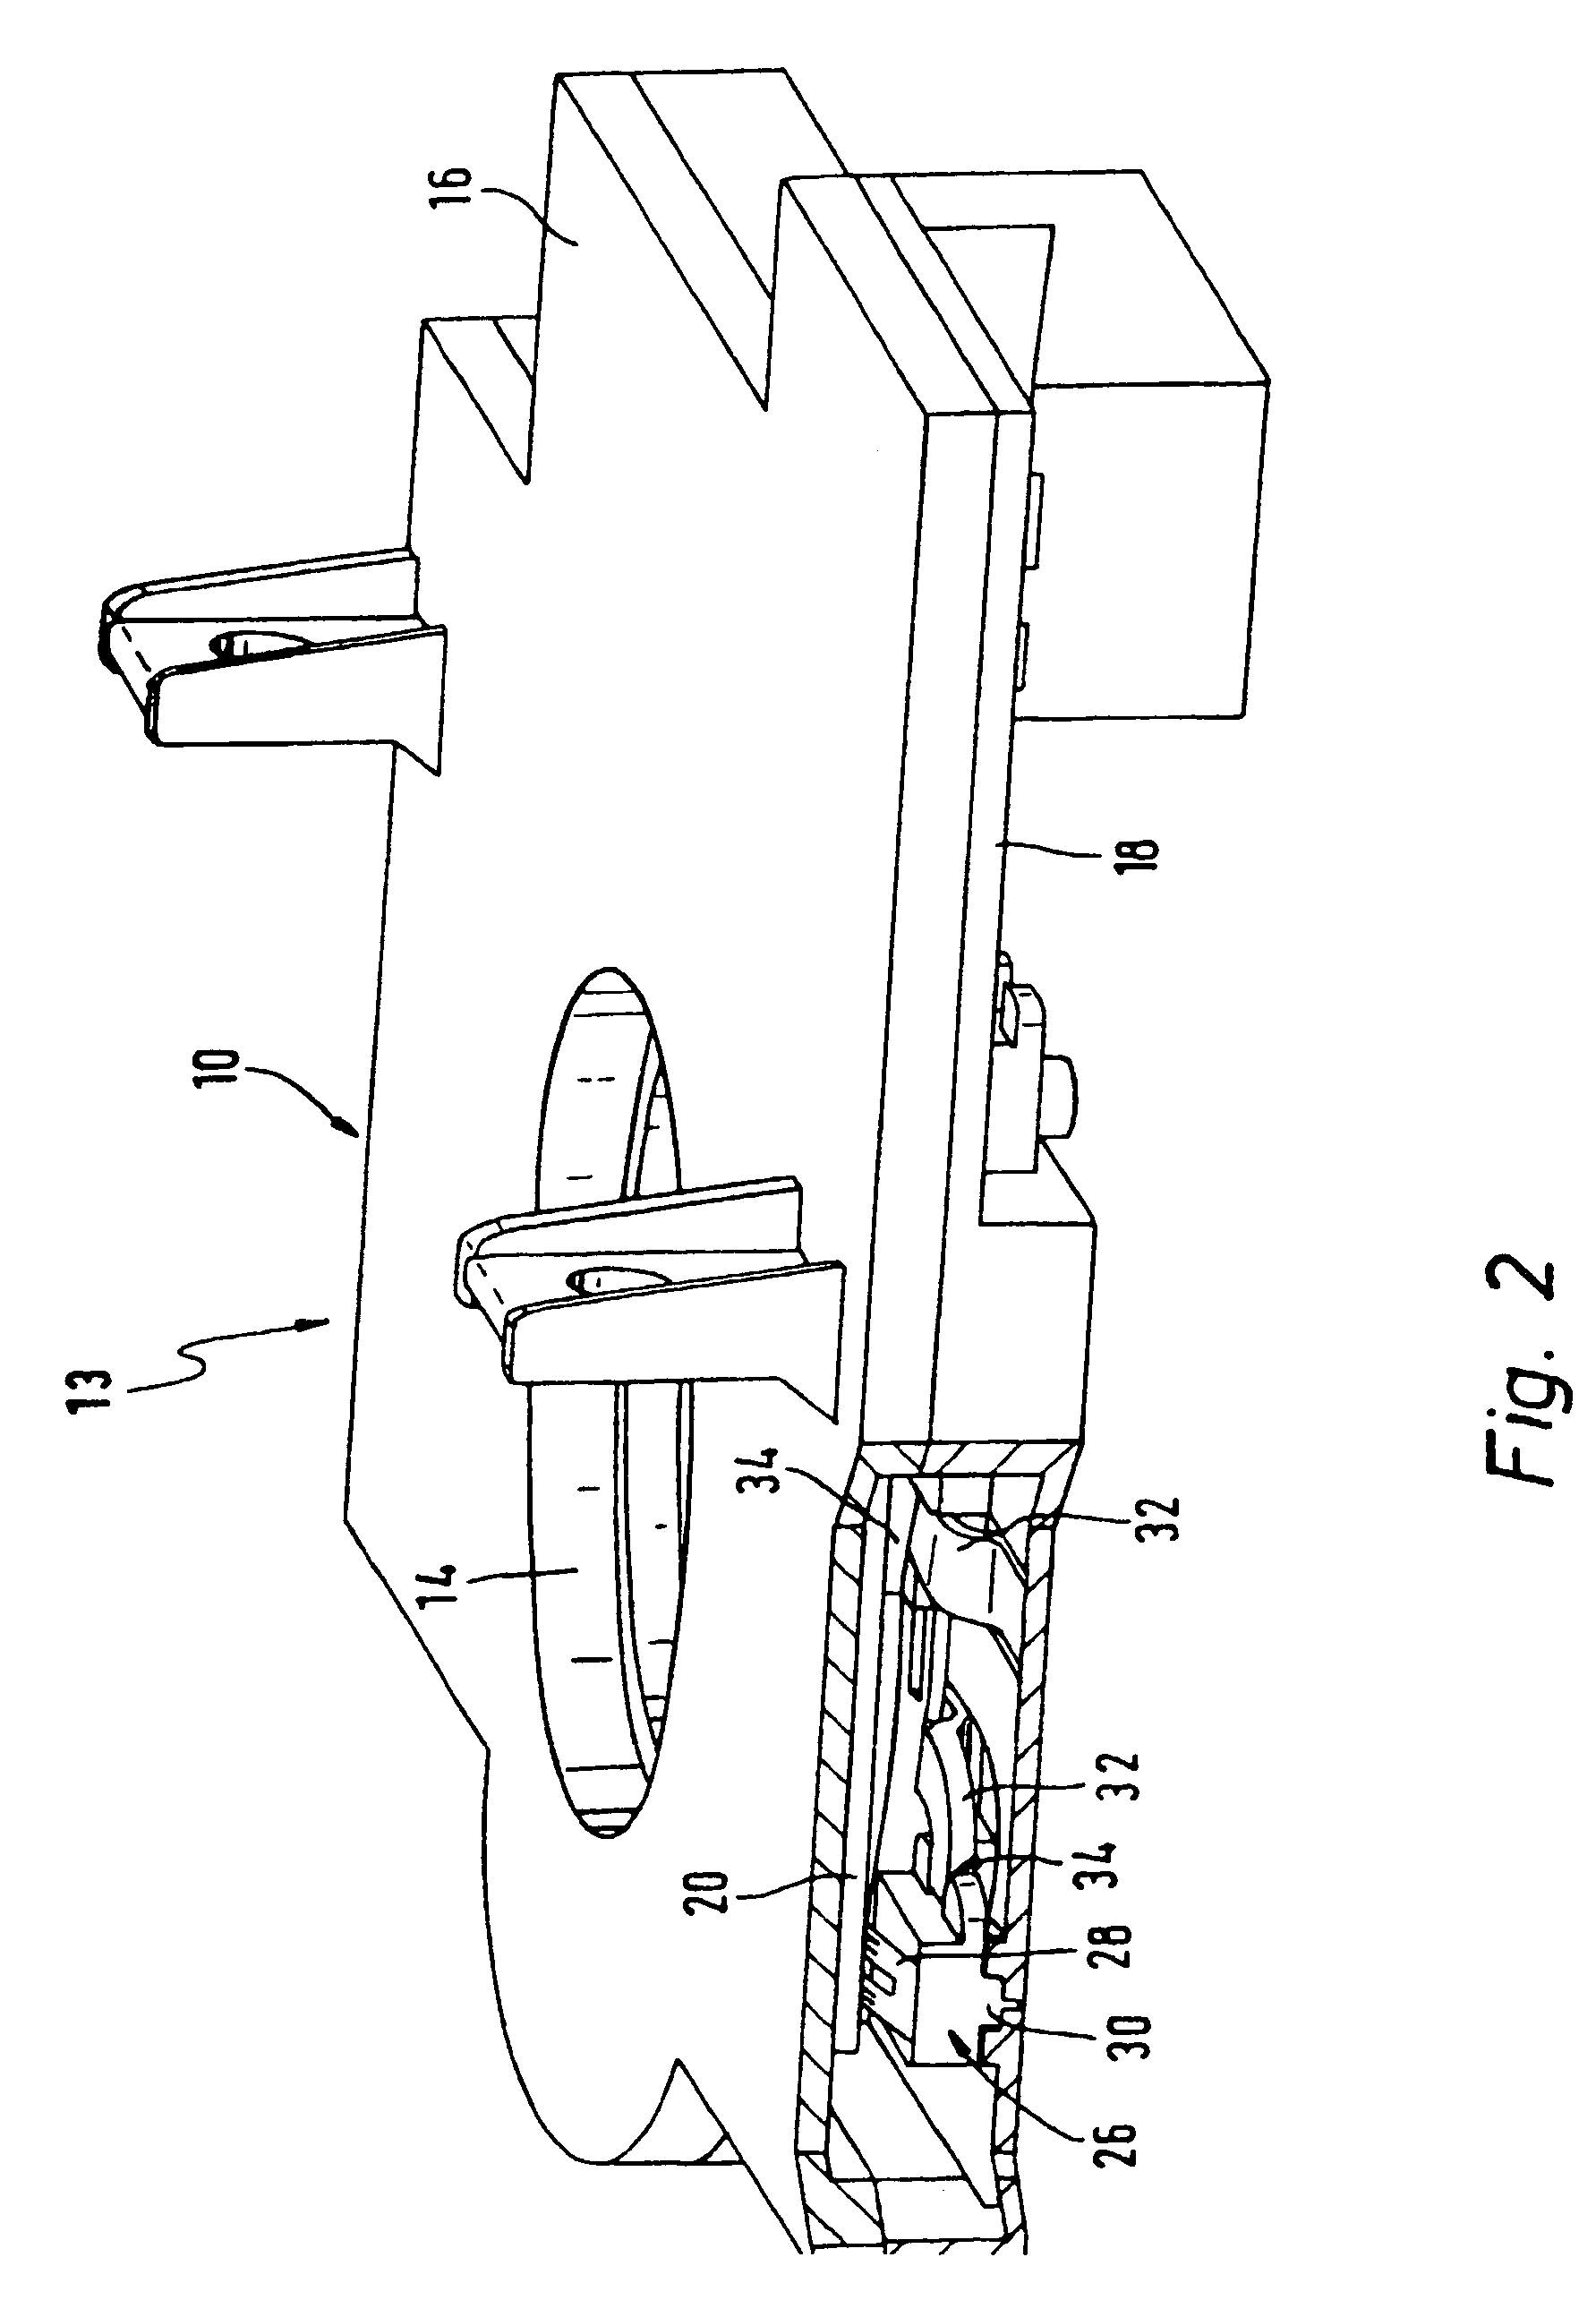 Steering column module for a vehicle